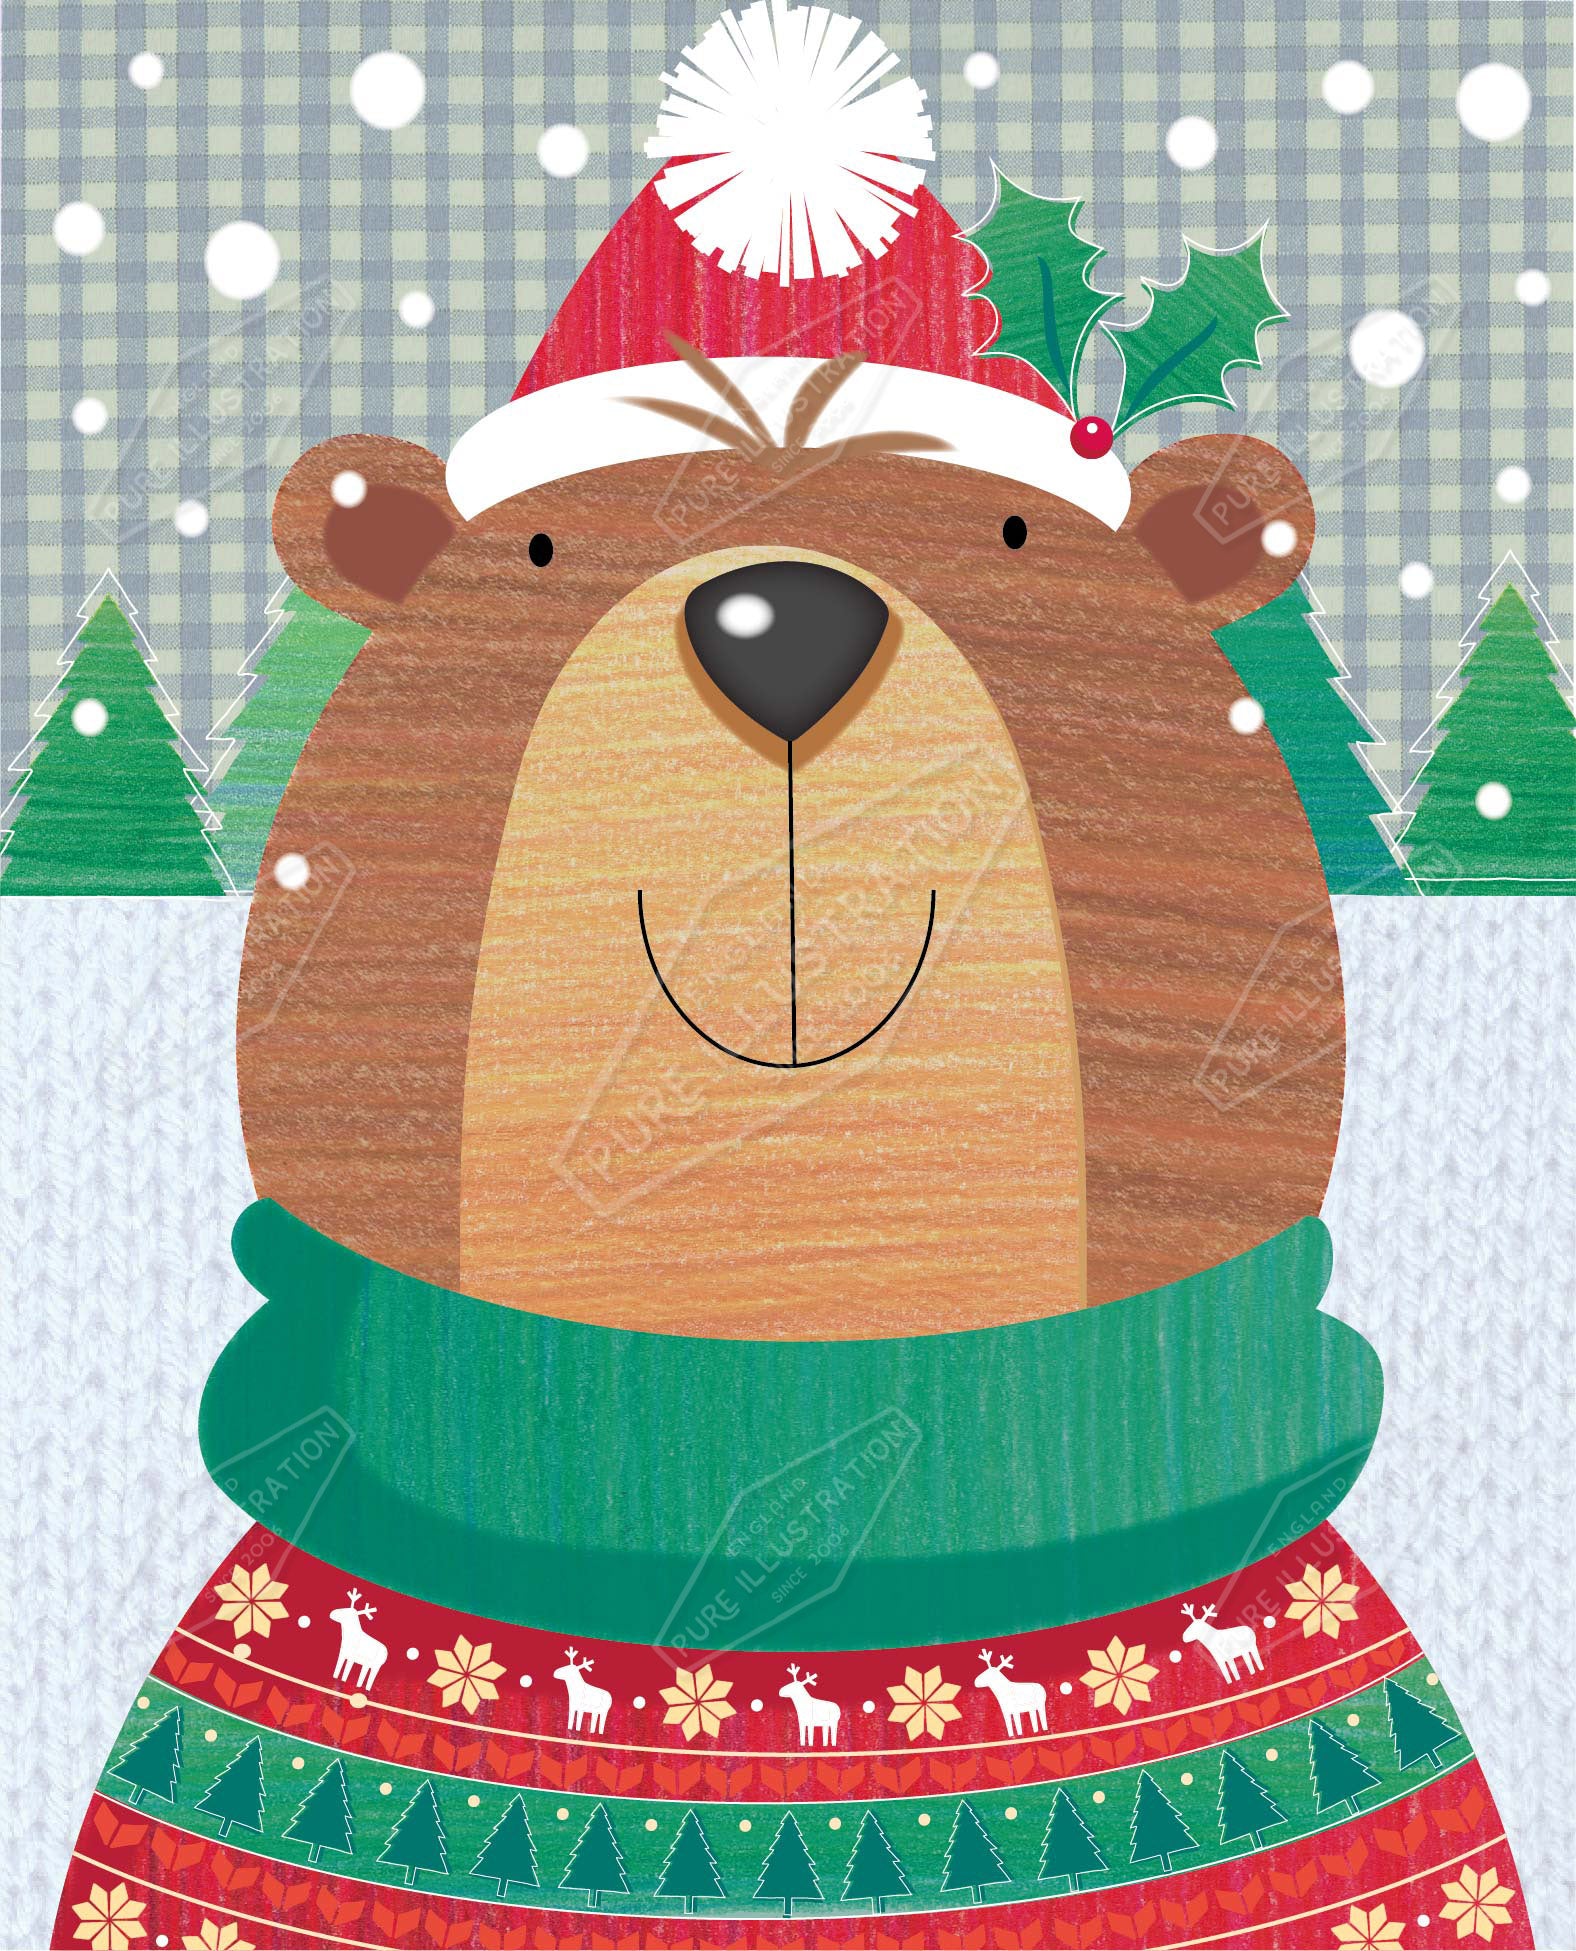 00035242SPI- Sarah Pitt is represented by Pure Art Licensing Agency - Christmas Greeting Card Design